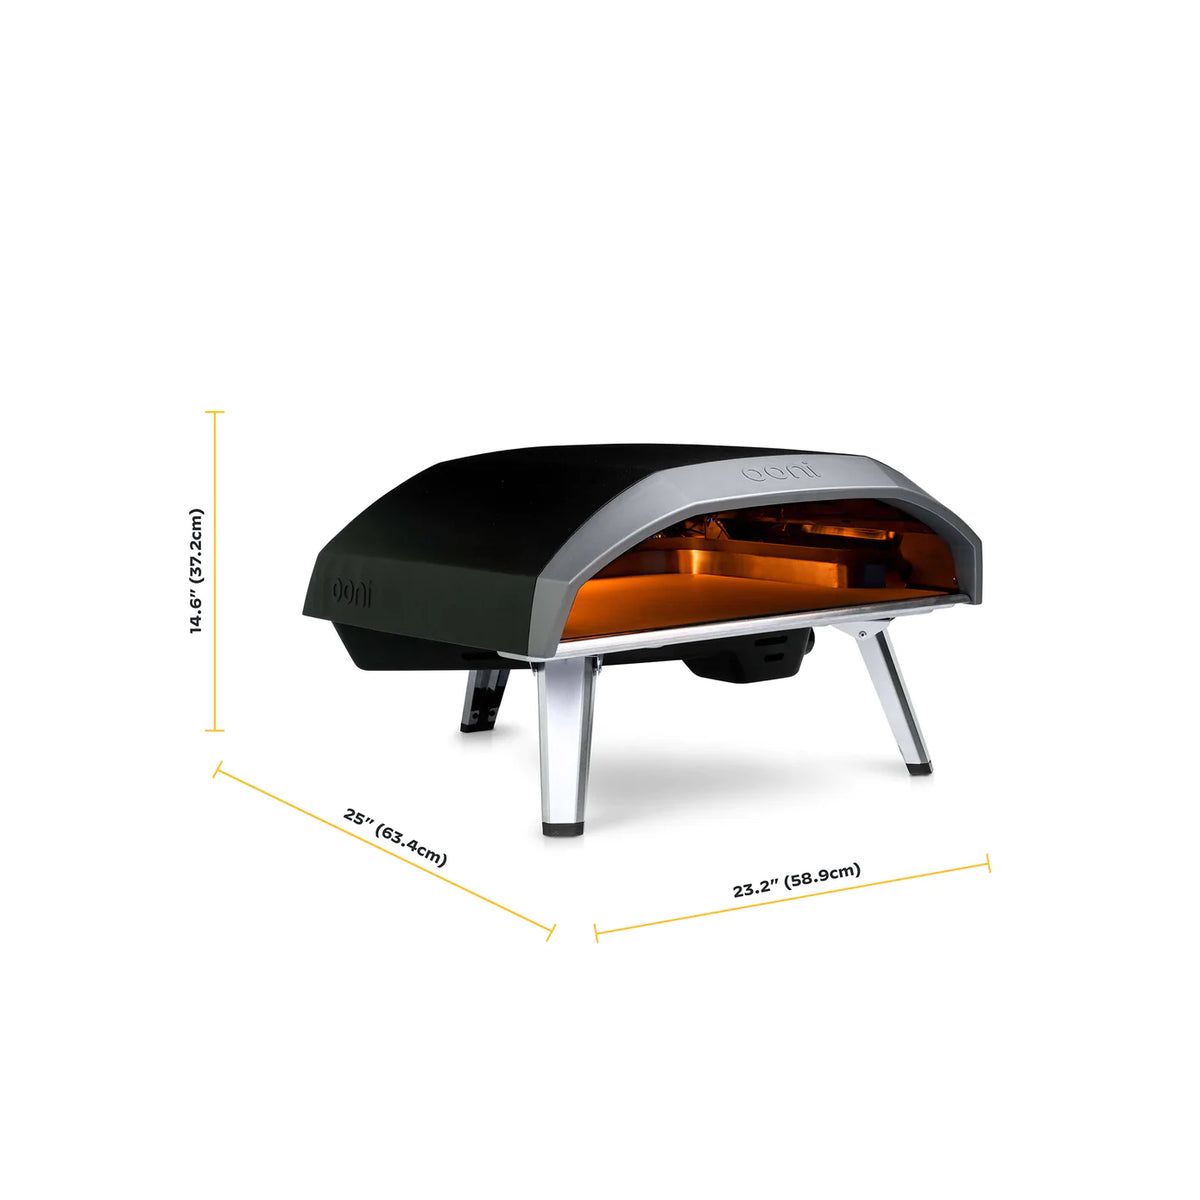 Ooni Koda 16 gas-powered pizza oven runs on either propane or natural gas  for control » Gadget Flow